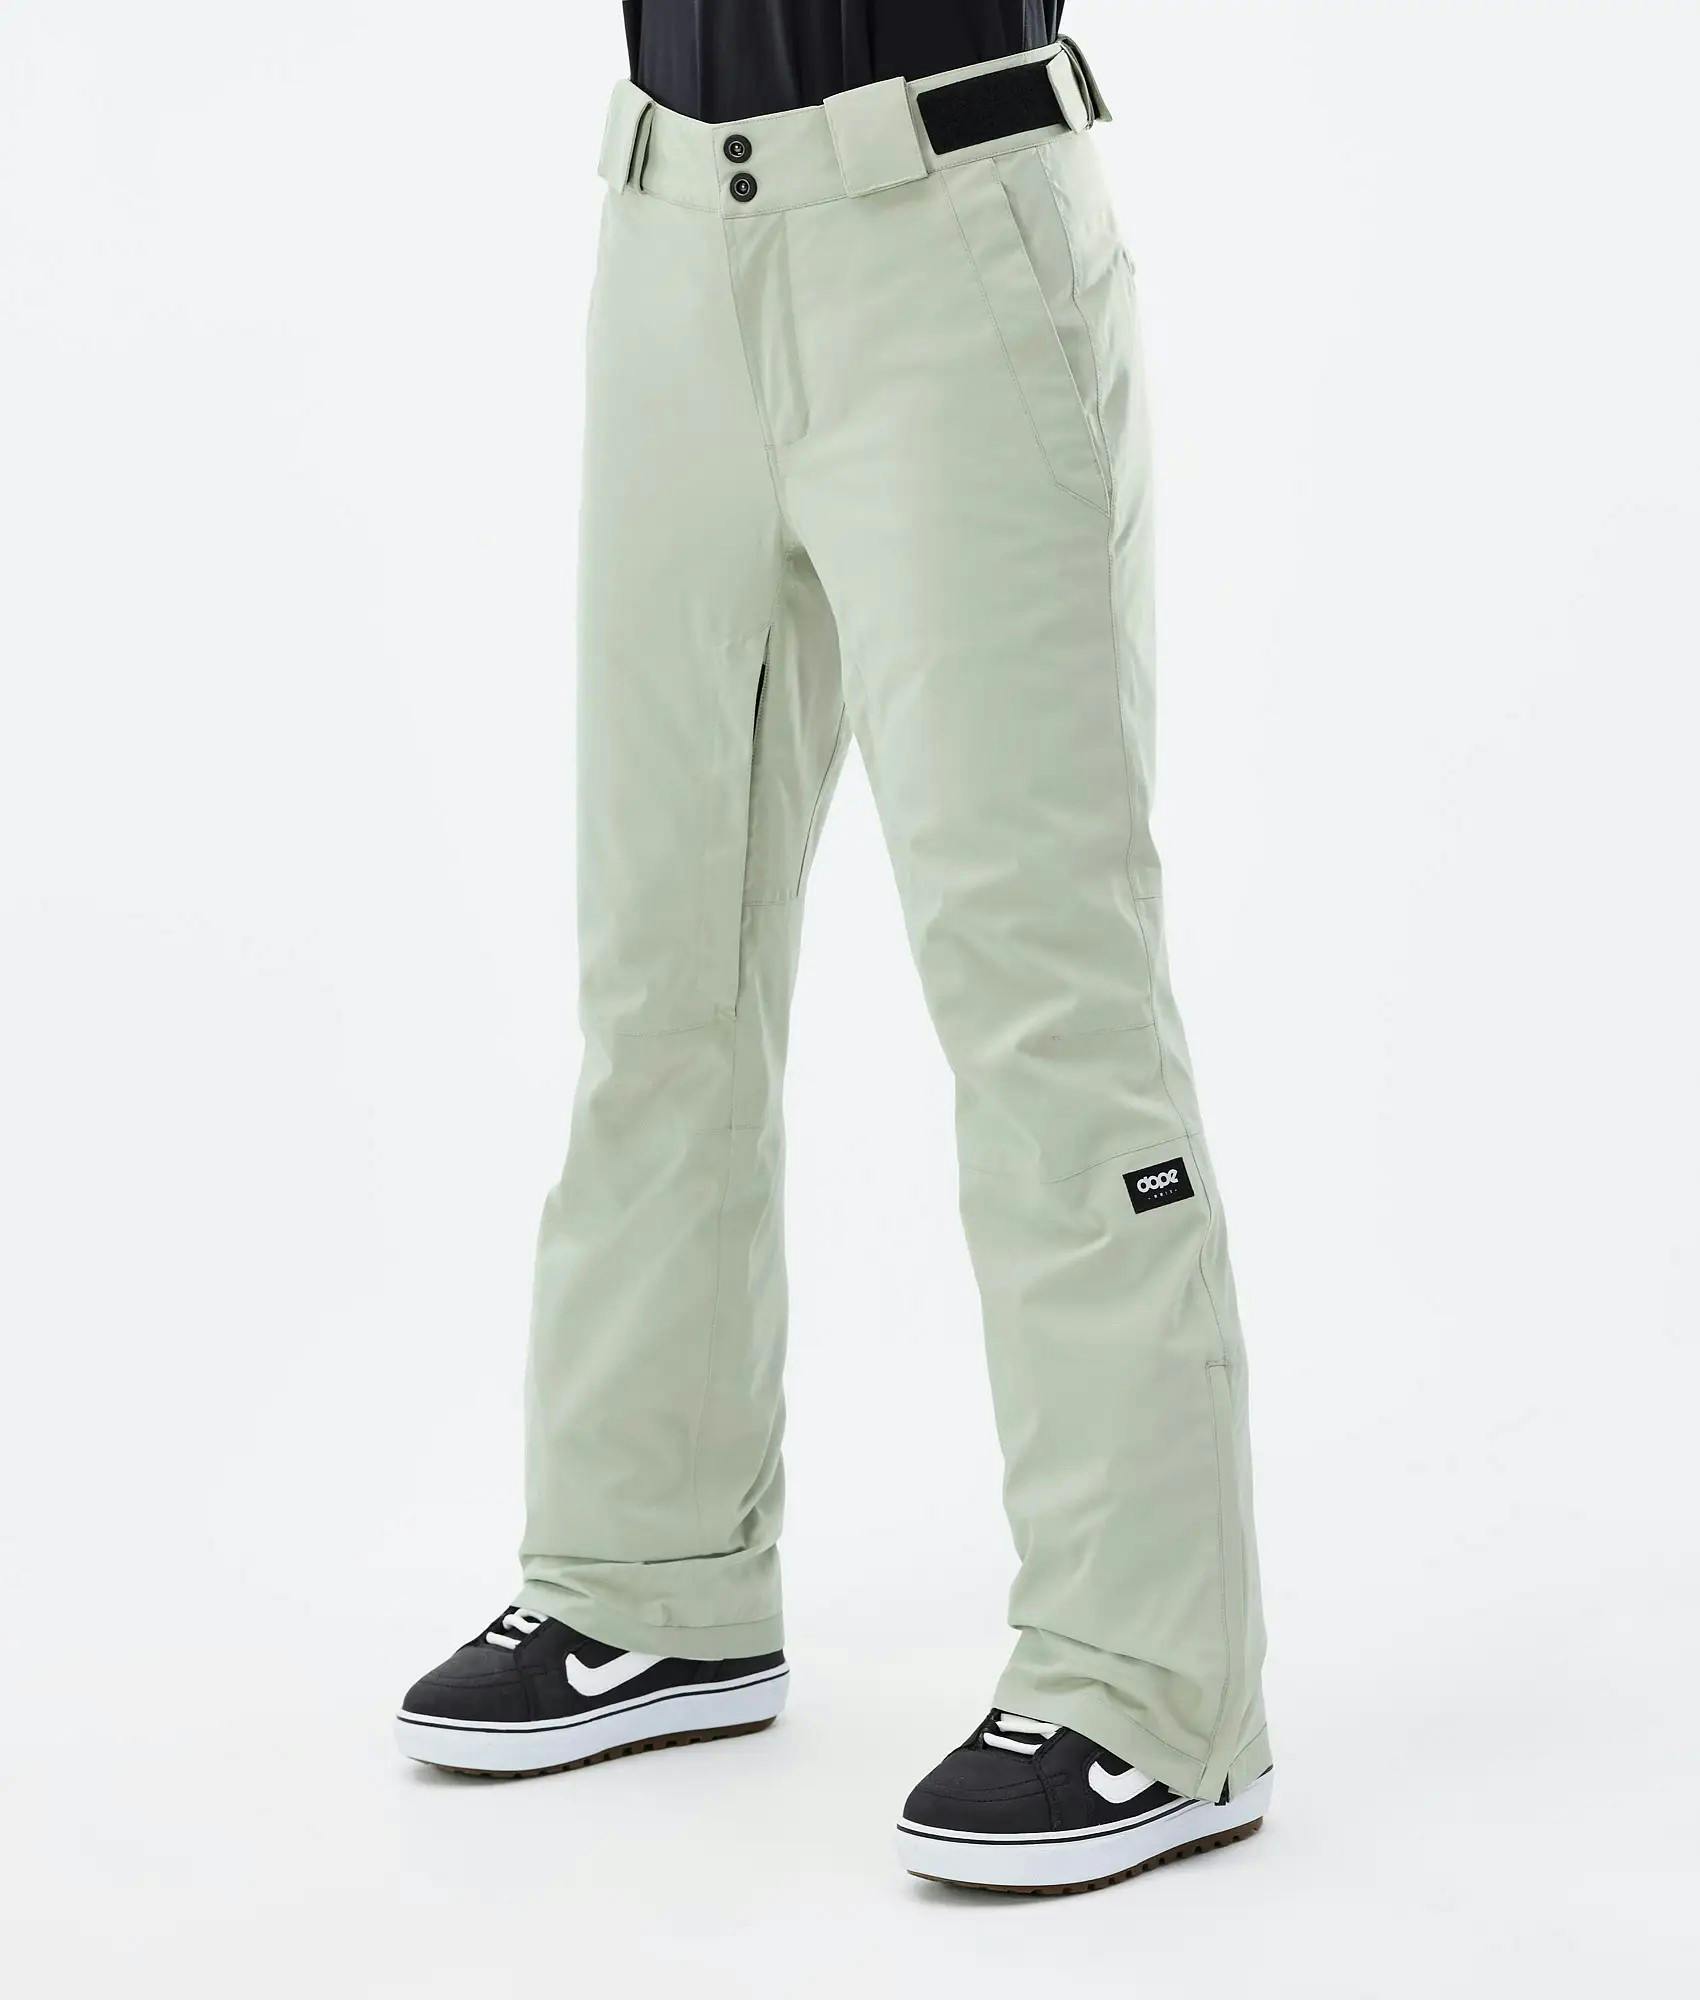 Dope Con Snowboard Pants